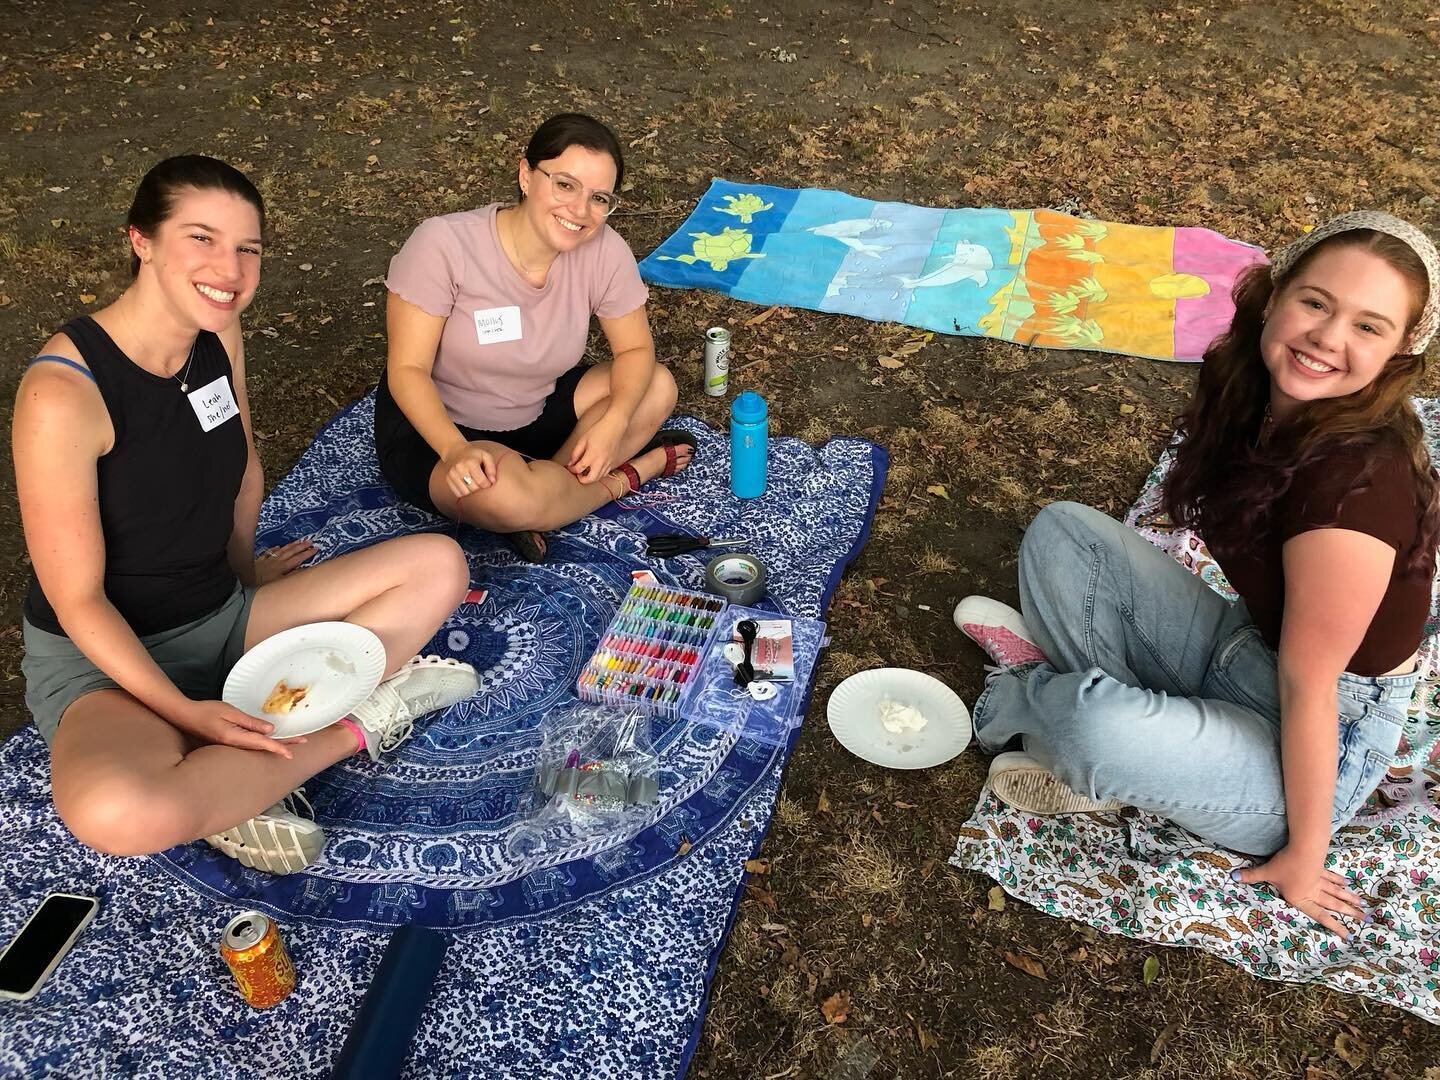 Last week, Boston&rsquo;s YWIN channeled their inner campers🏕 for an evening of crafts 🎨, games, and summer magic✨

Stay tuned for more events coming soon!

#getcampy #ywin #friendship